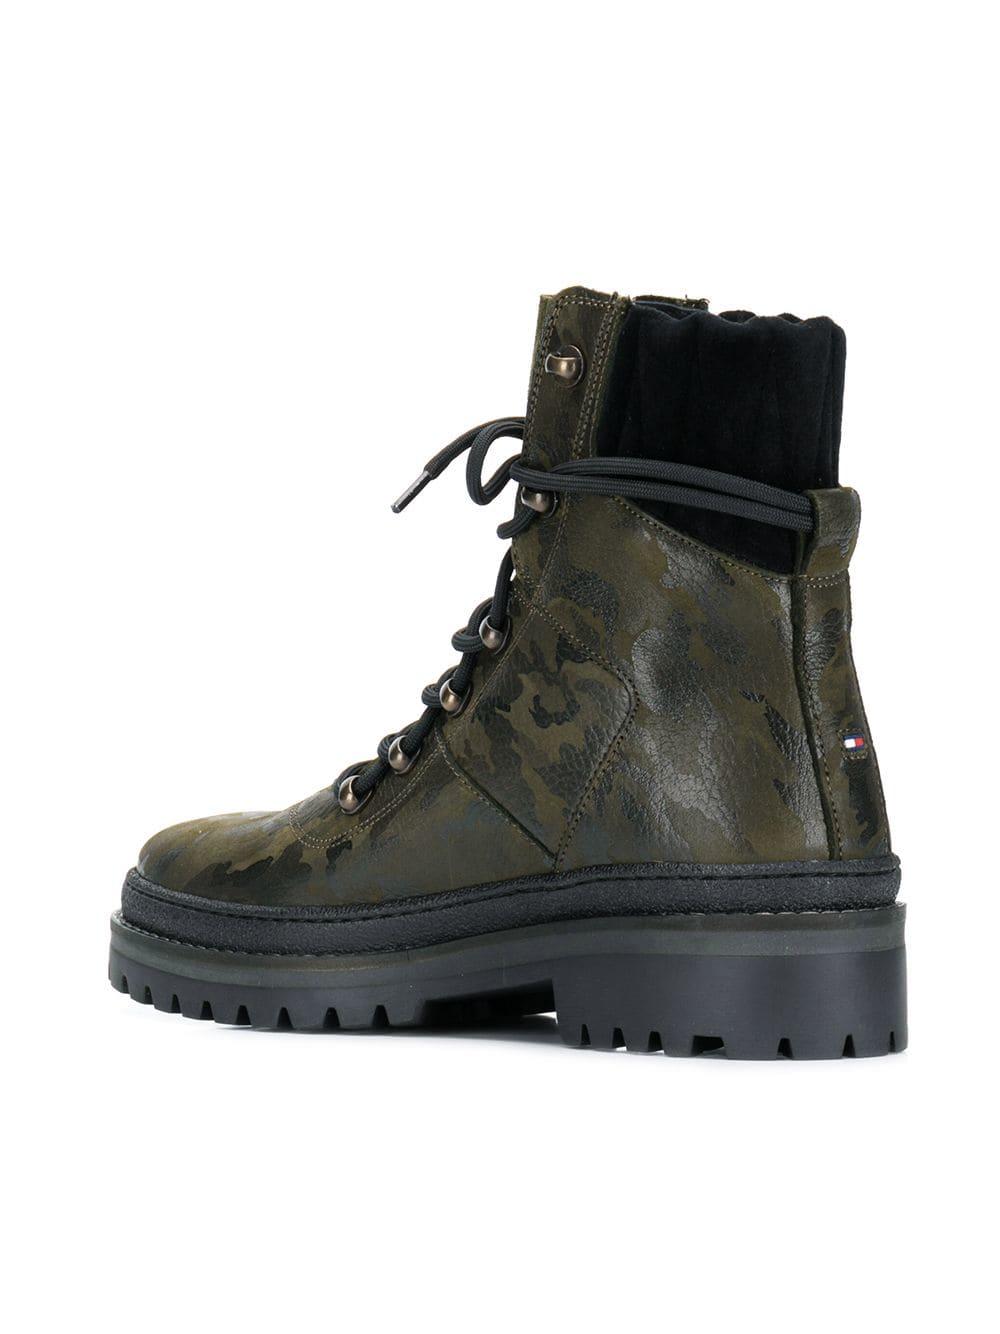 Tommy Hilfiger Cotton Camouflage Hiking Boots in Green - Lyst